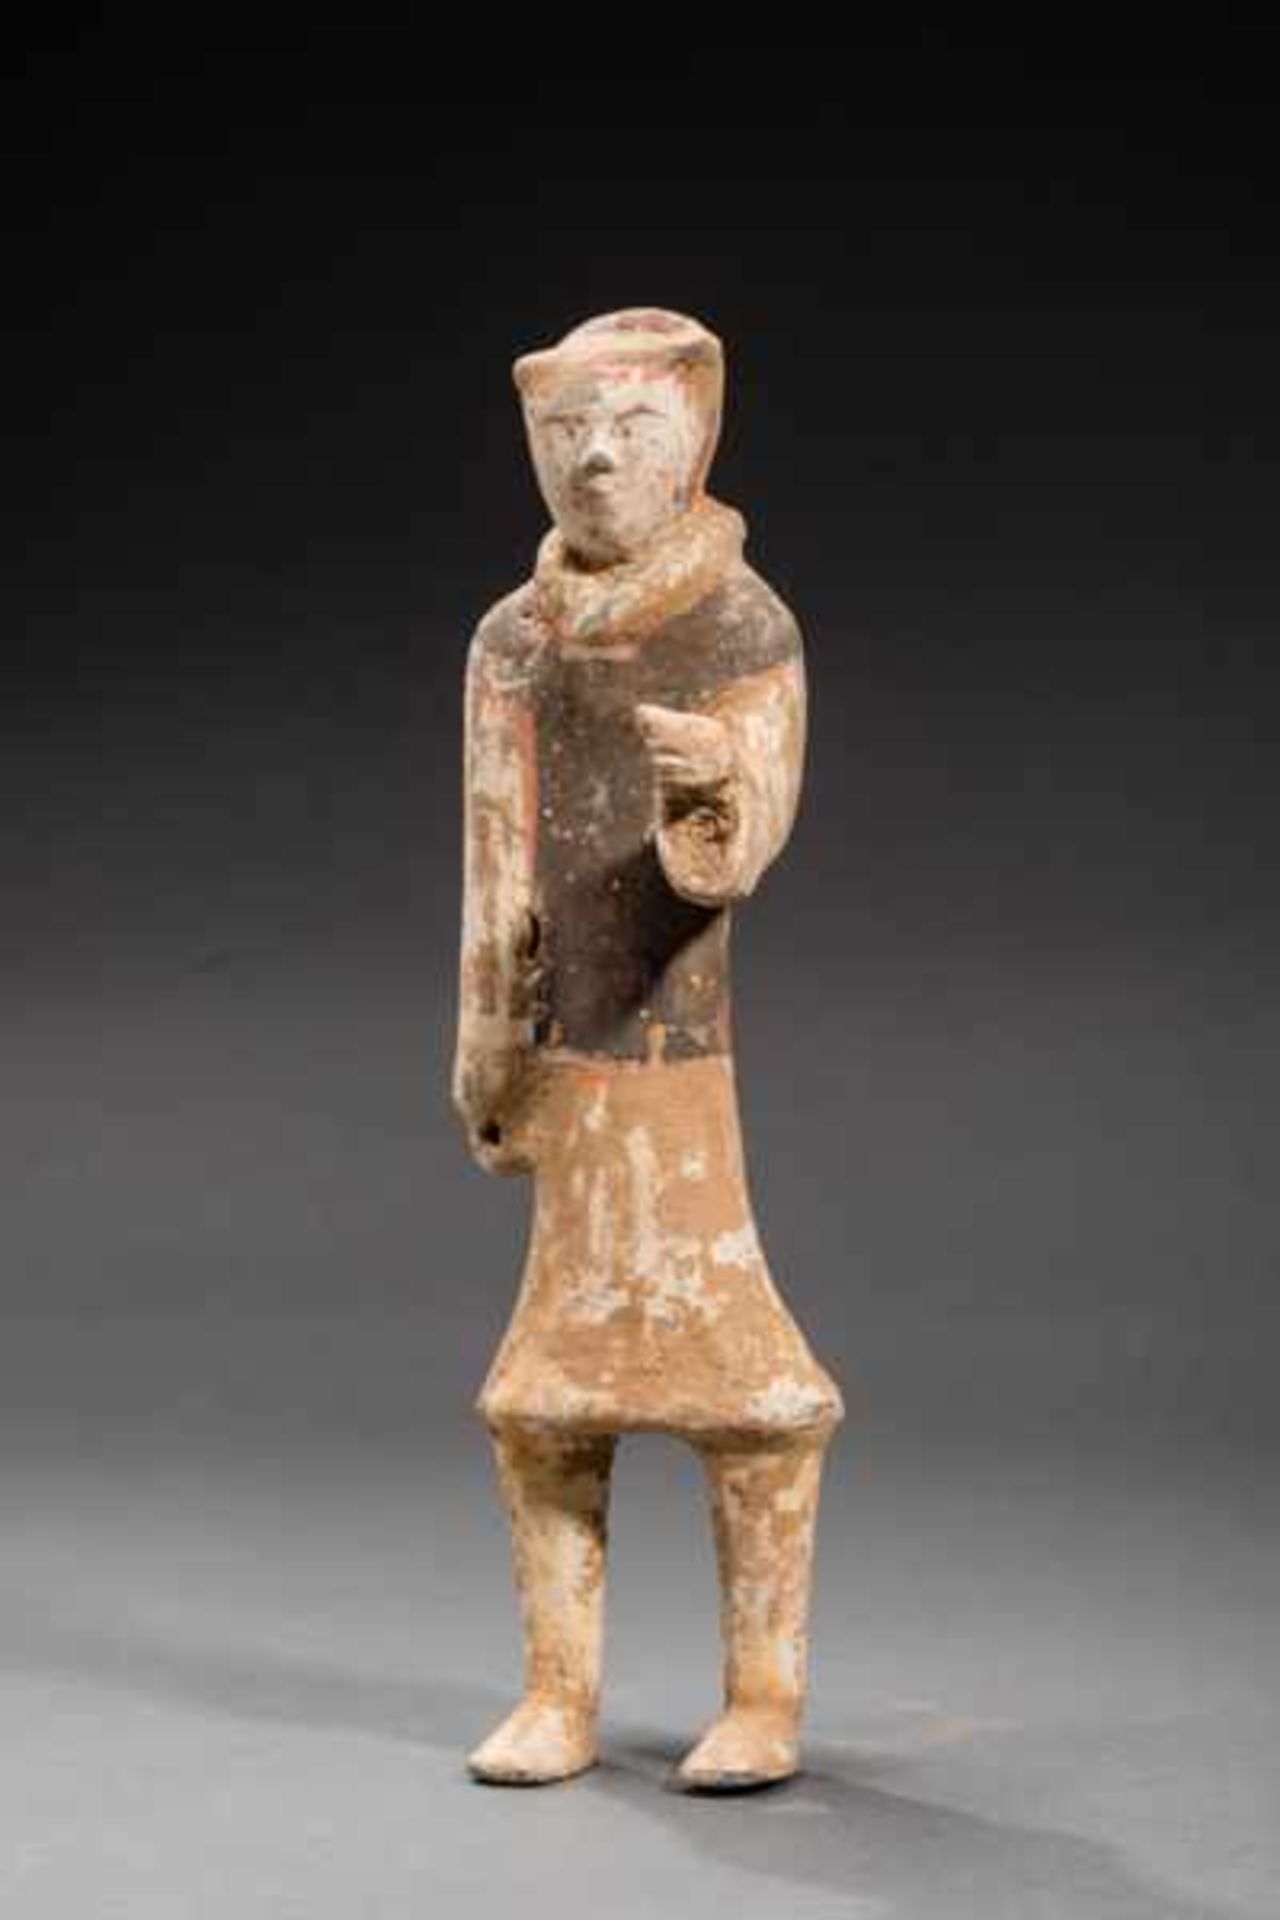 SMALL GUARDSMAN Terracotta with remnants of originalpainting. China, Early Western Handynasty (3rd